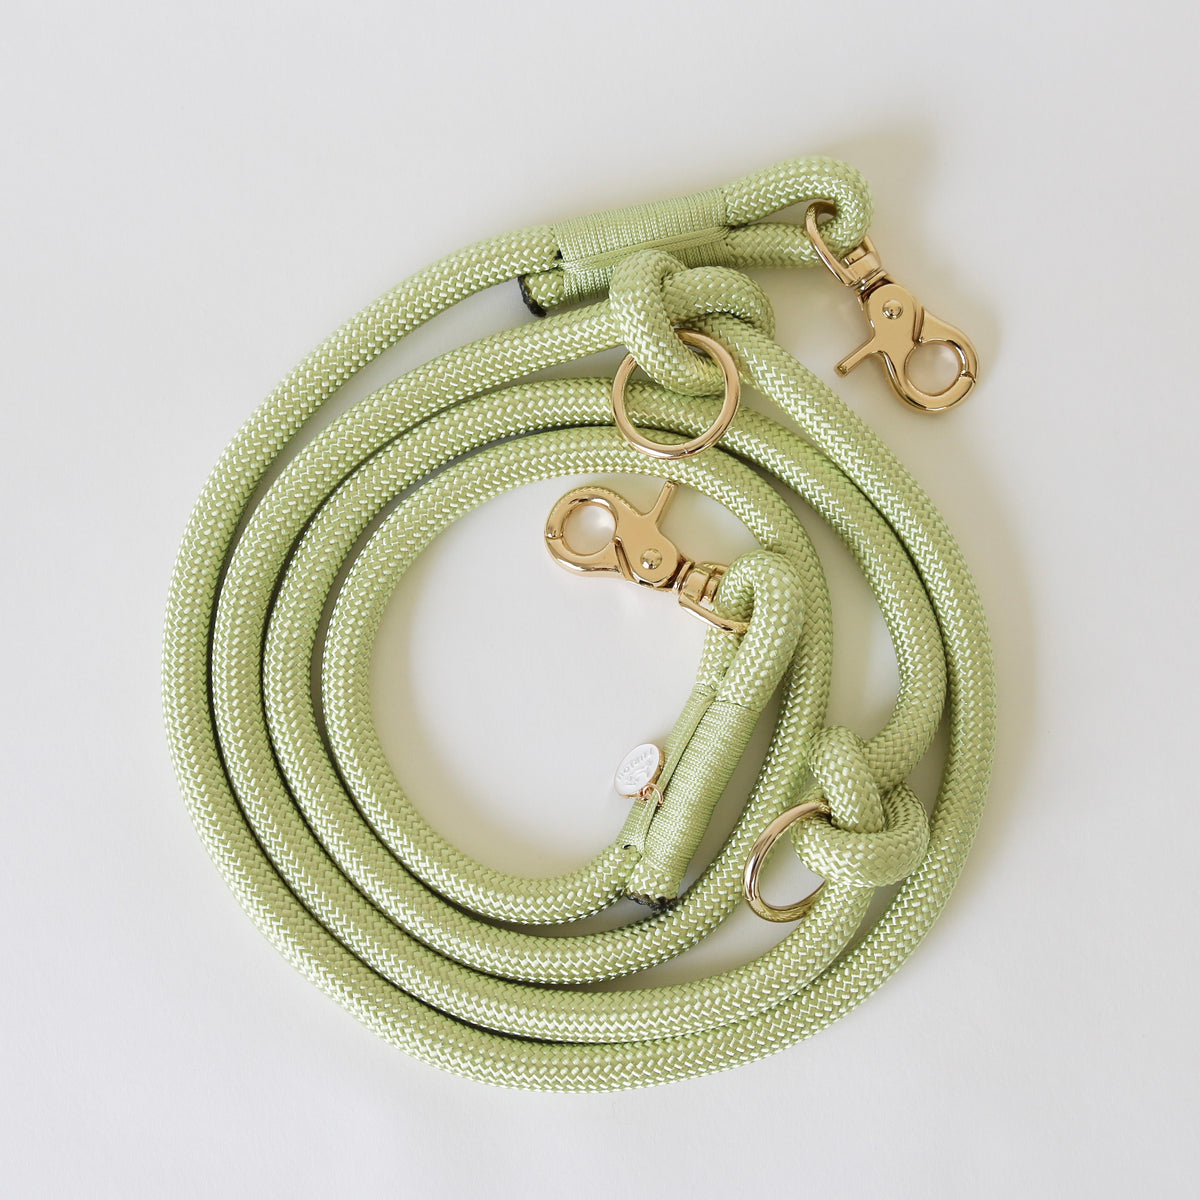 'Lime Green' - Hands Free Braided Leash